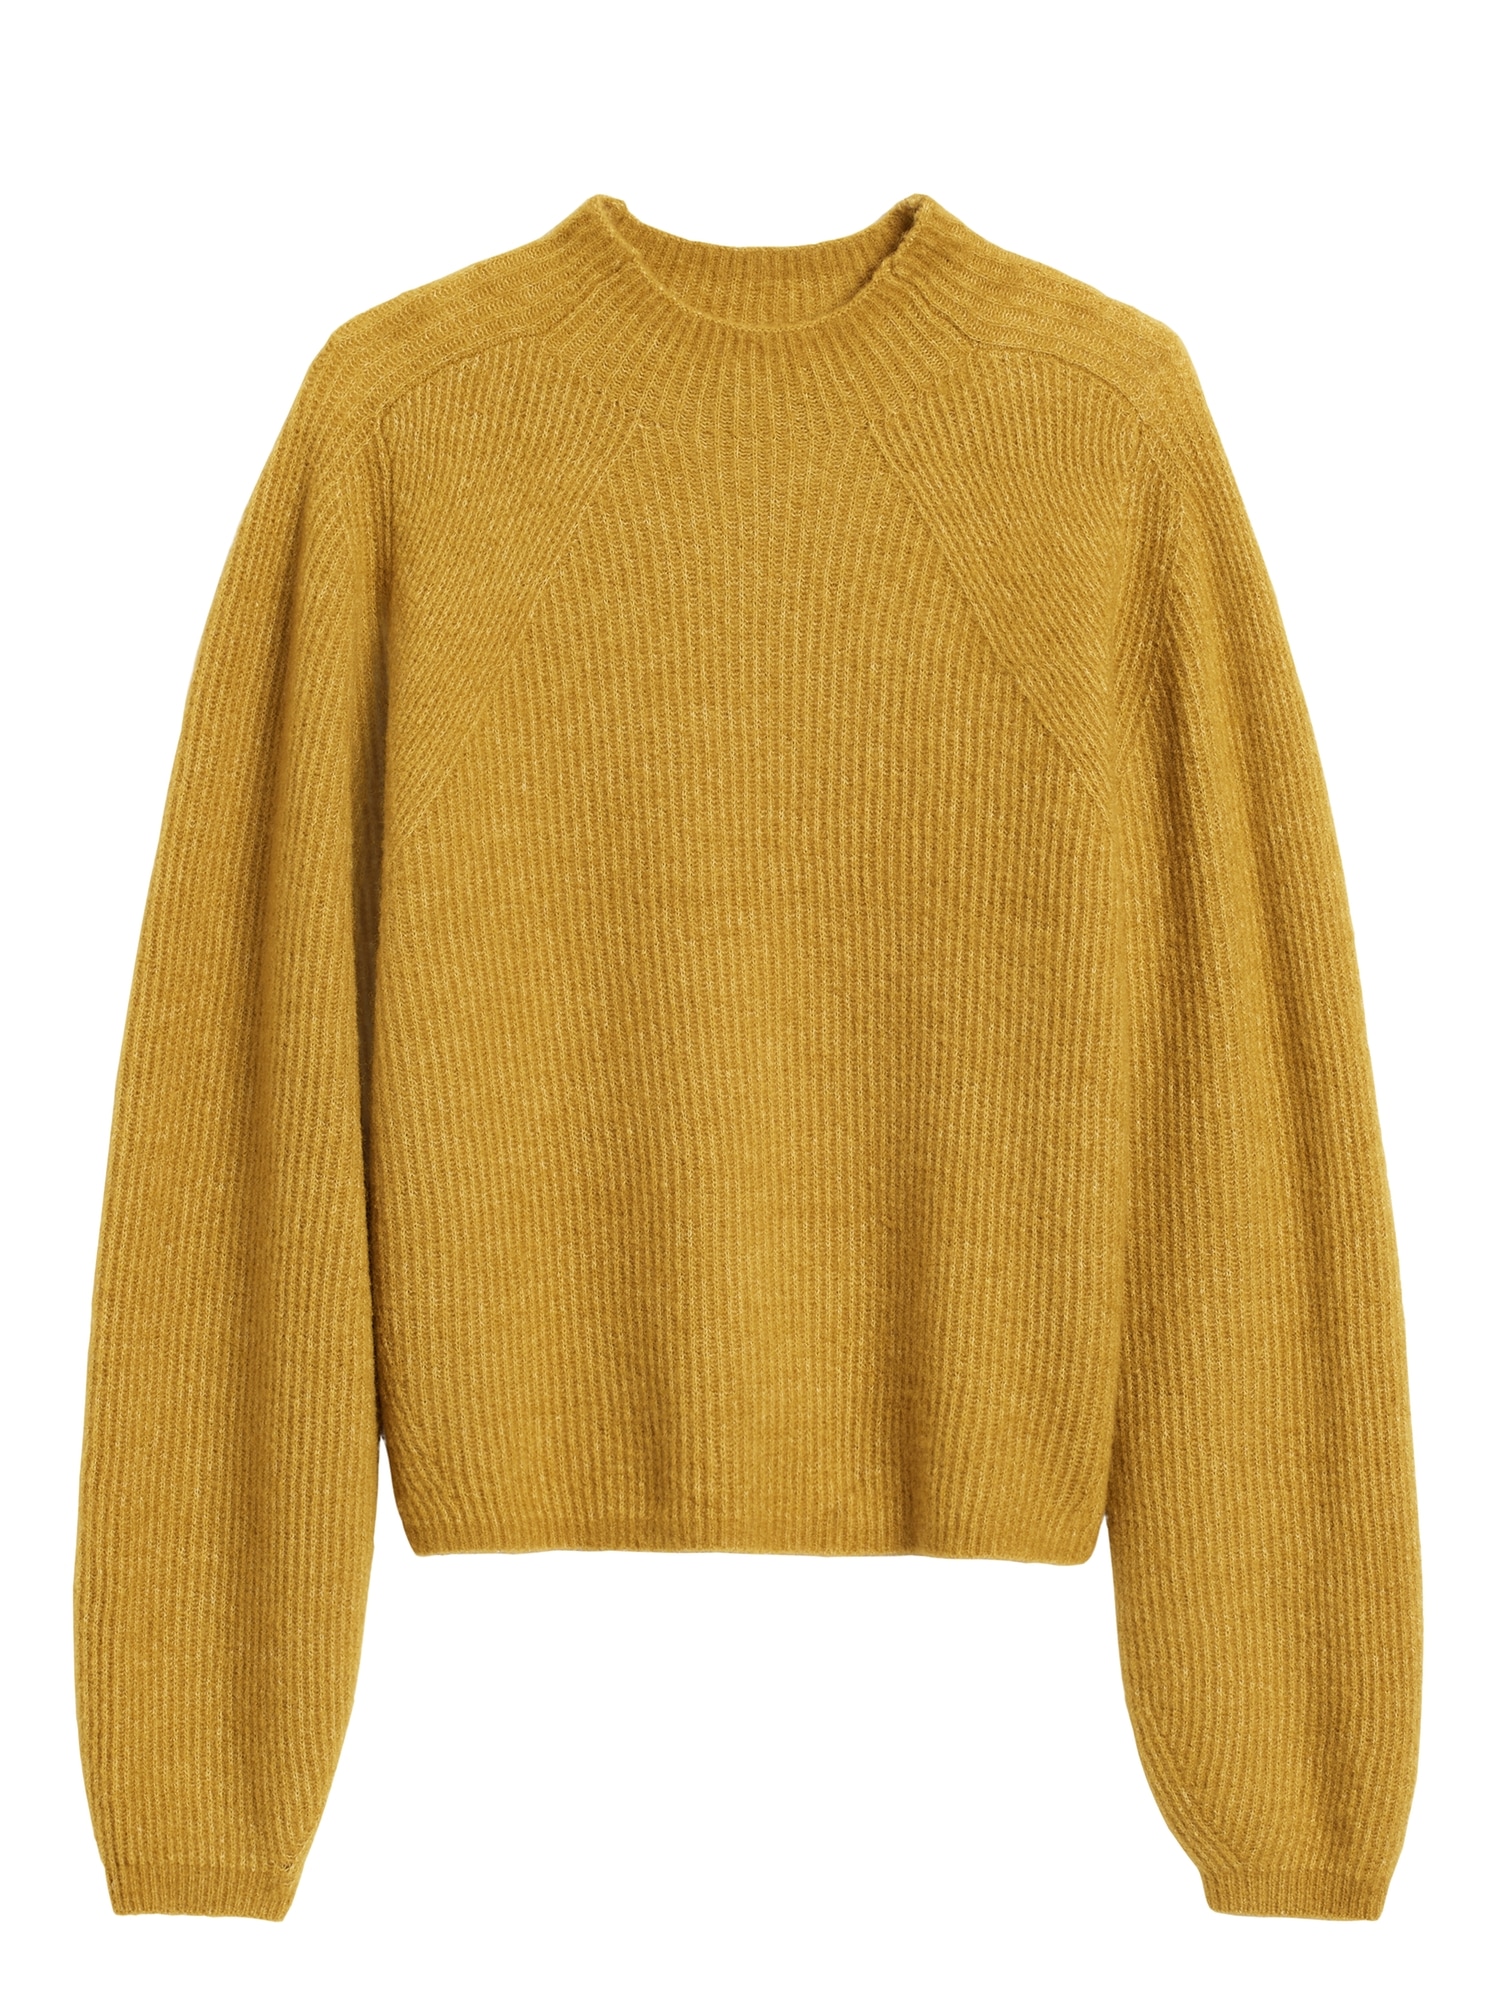 Aire Cropped Puff-Sleeve Sweater